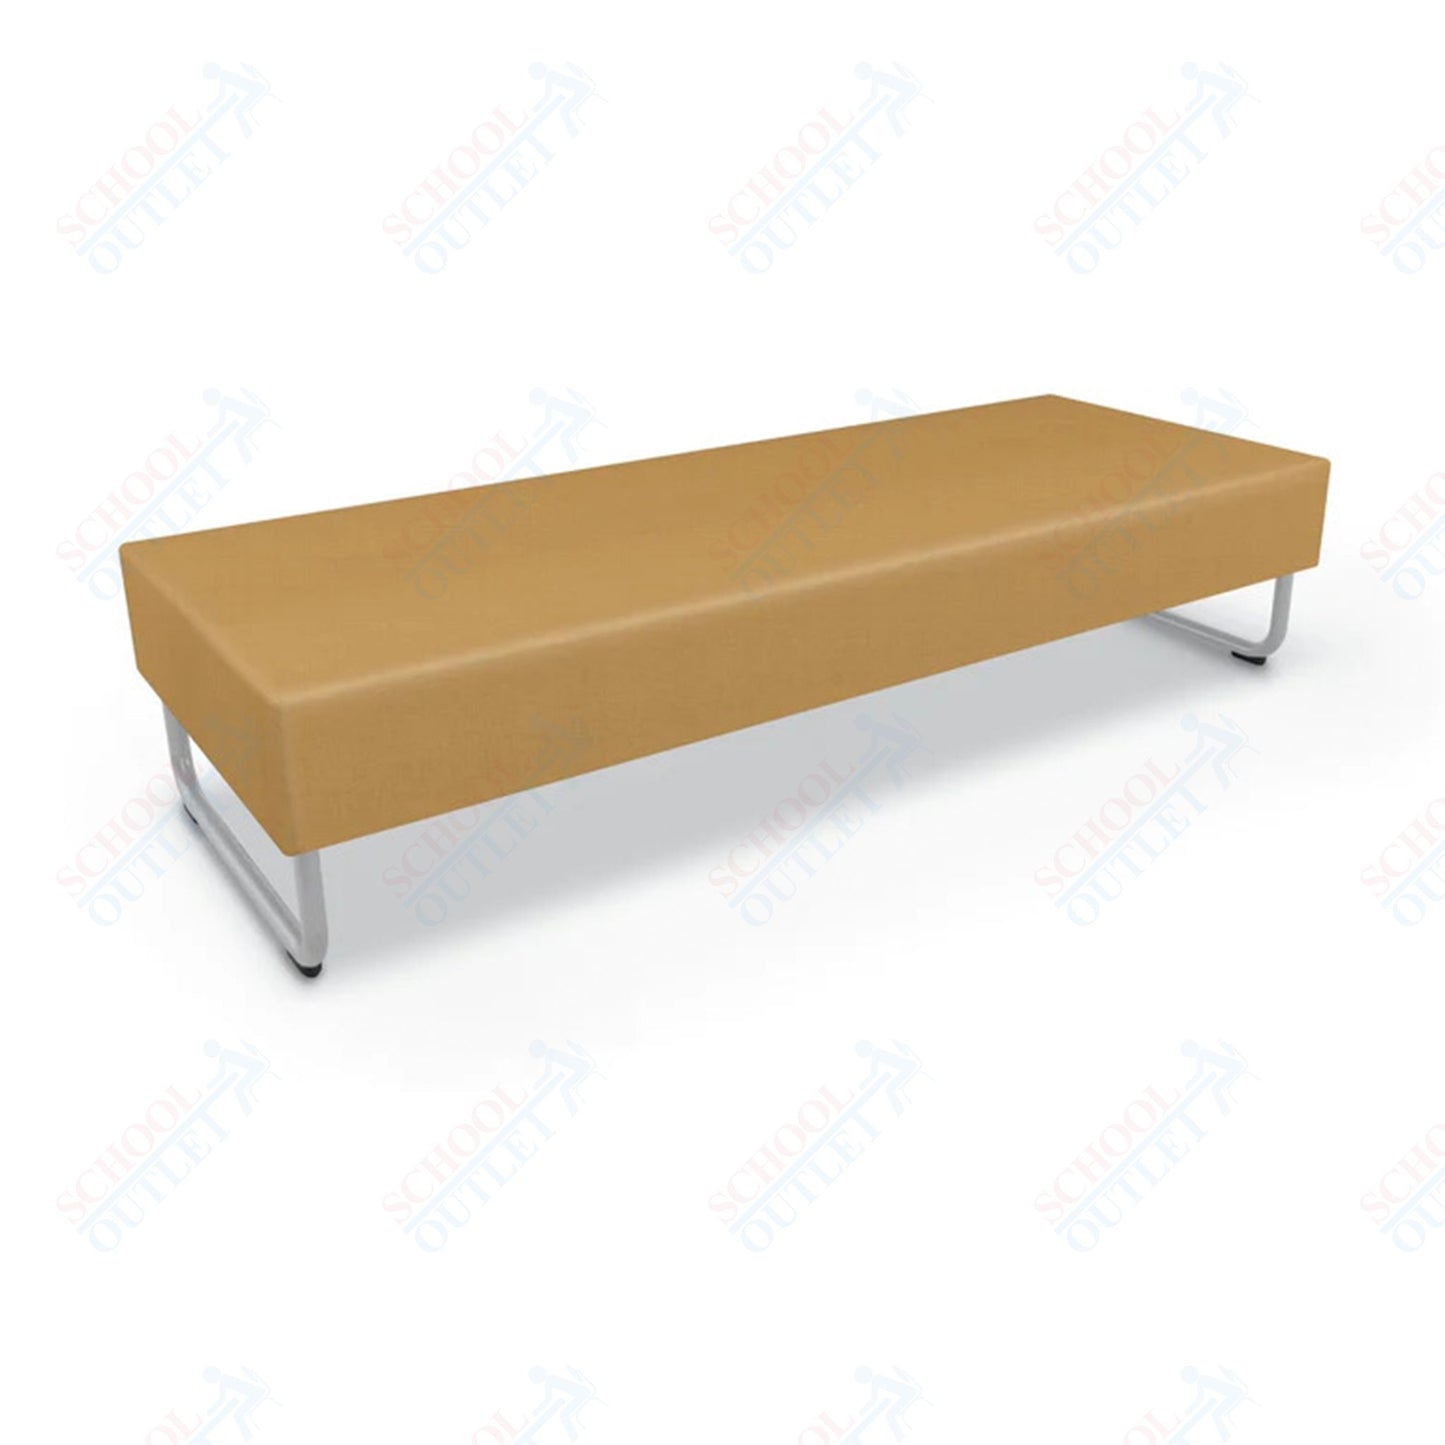 Mooreco Akt Soft Seating Lounge Sofa Bench - Grade 02 Fabric and Powder Coated Sled Legs